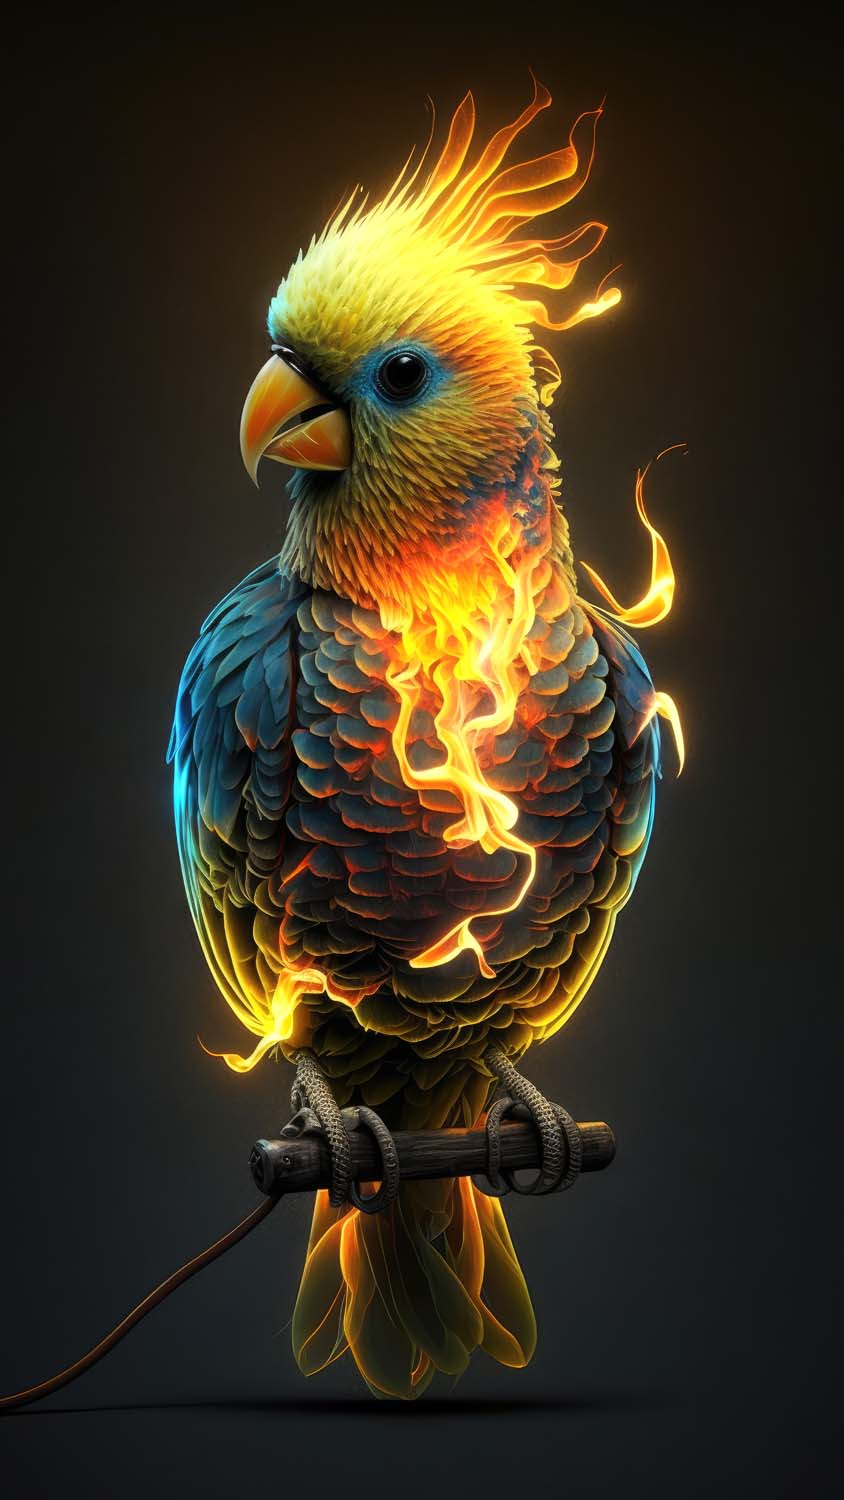 About Parrot Wallpaper Hd Google Play version   Apptopia